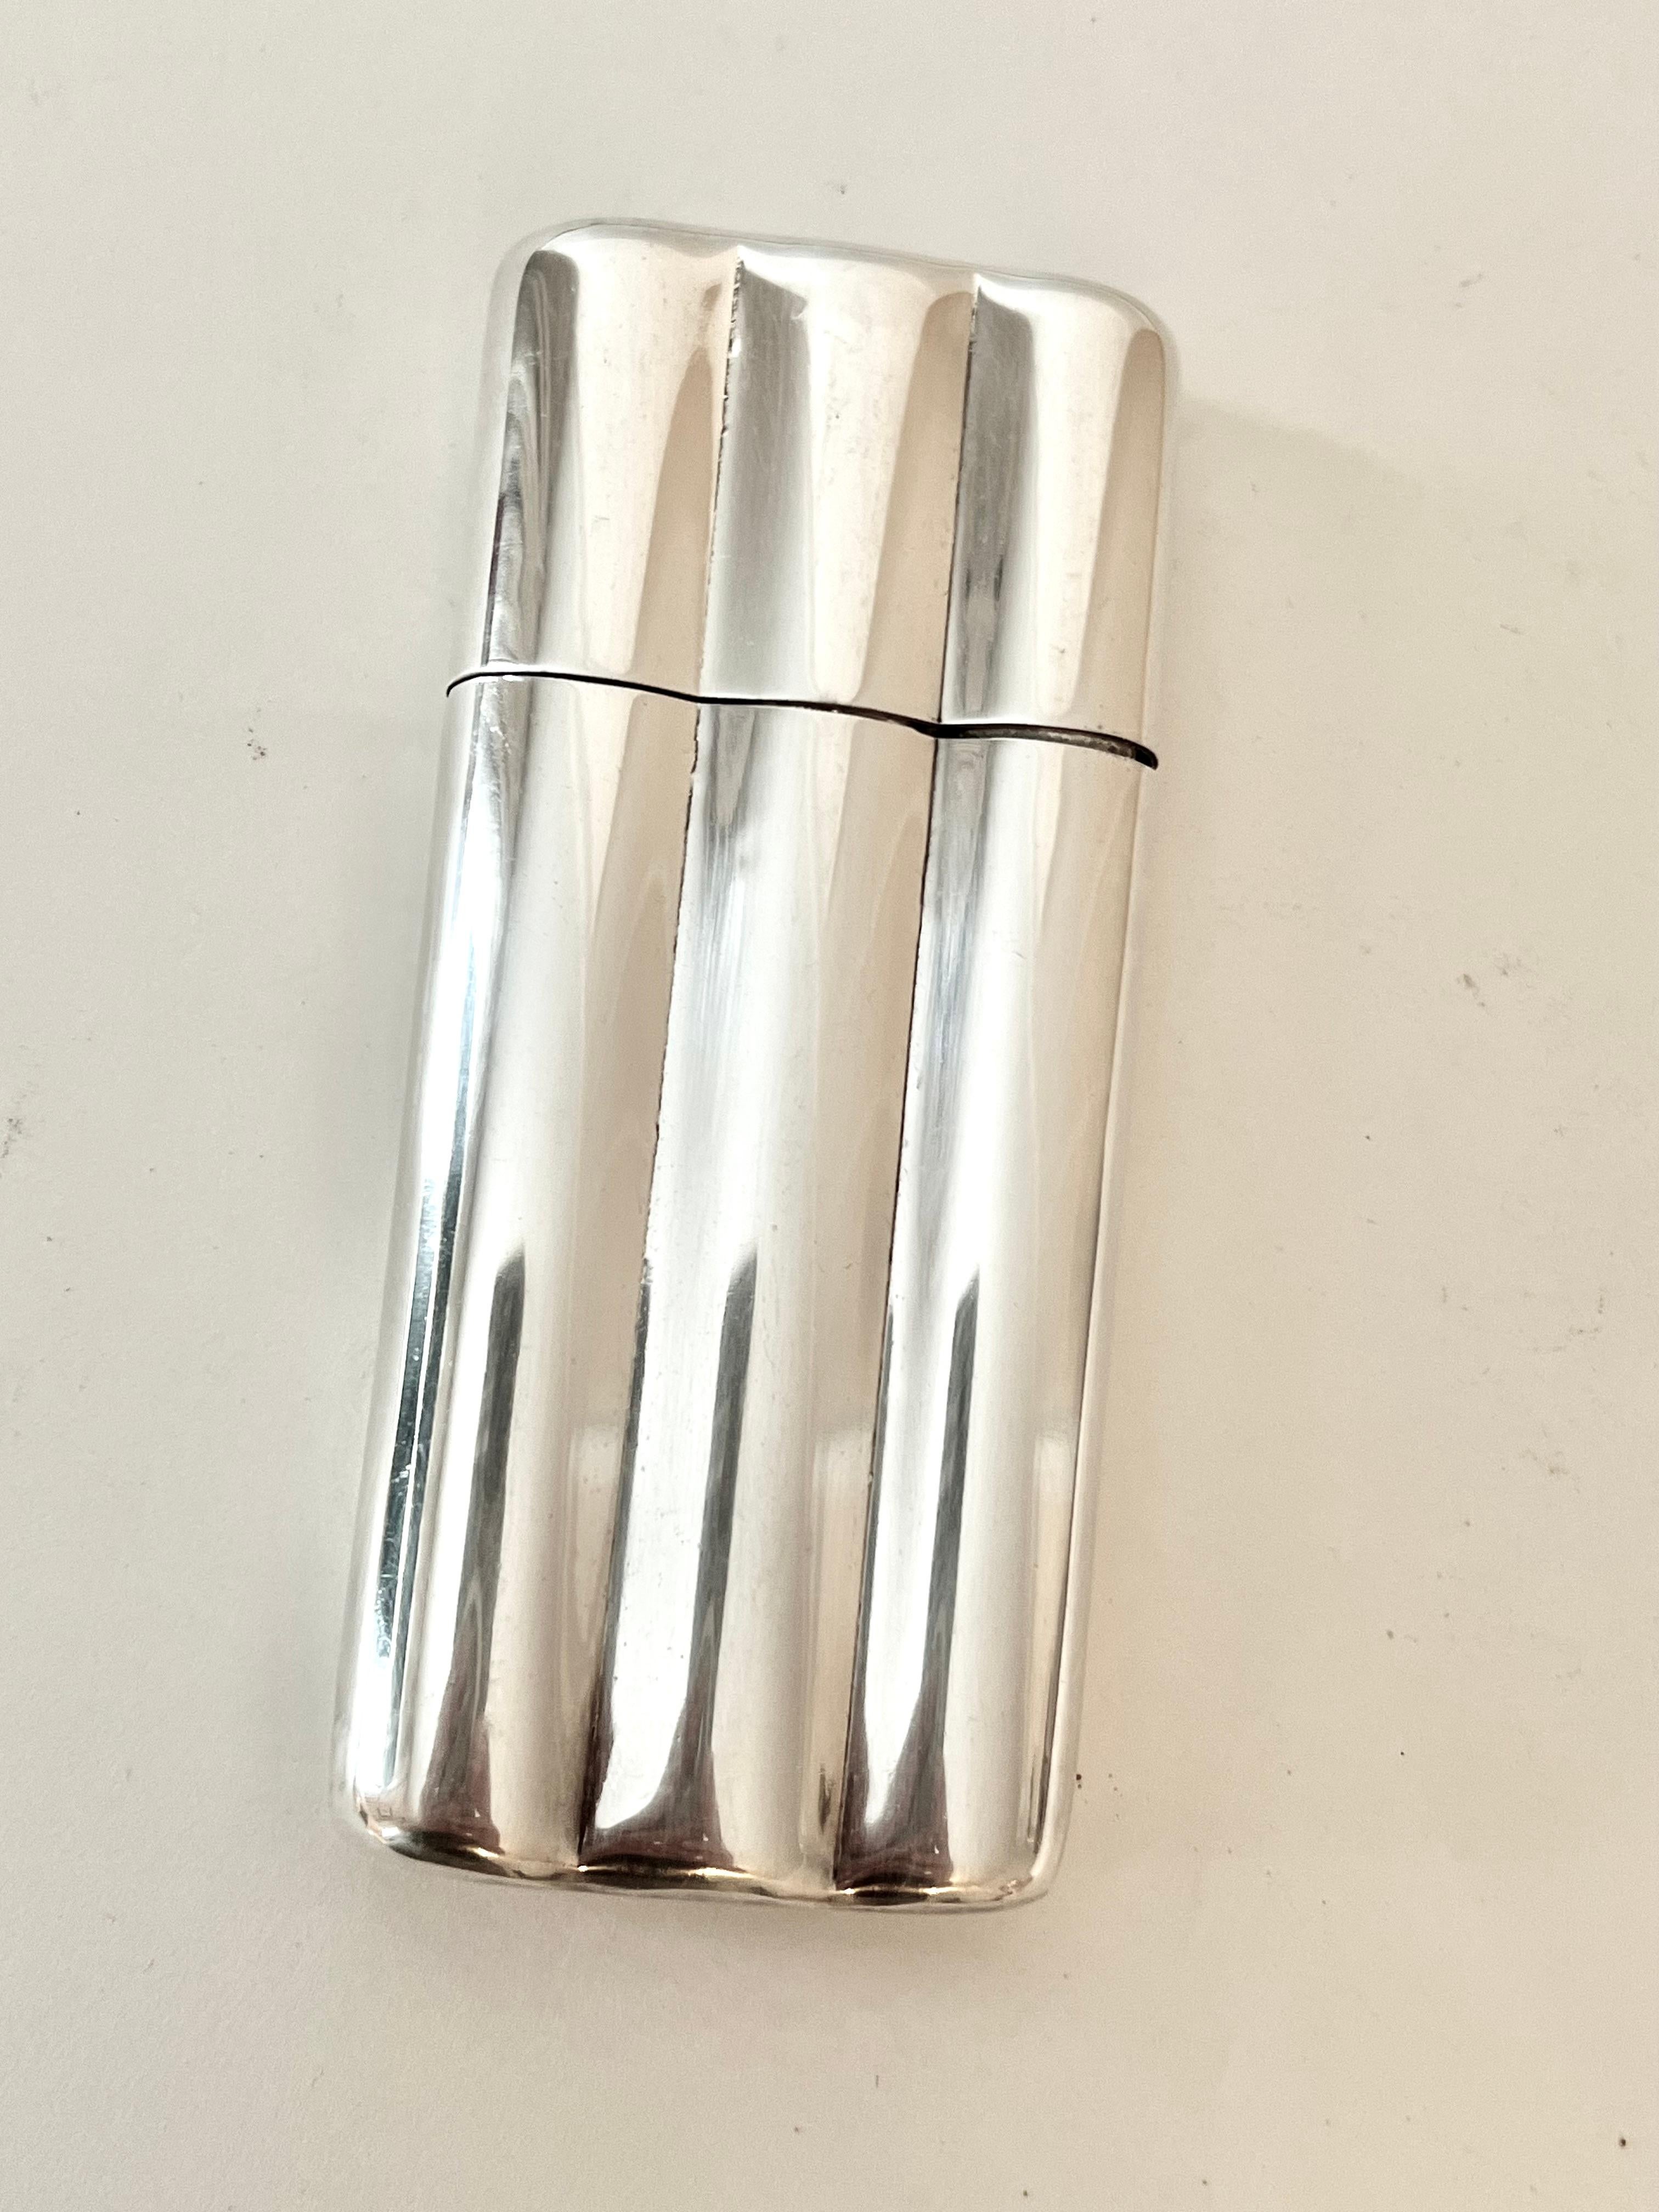 A three compartment silver plate cigar holder.  A great gift for fathers day or for the cigar aficionado!  A nice addition to a bar, for the bartender that has over his smoking friends! 

A beautiful case - holds three cigars, the smaller style